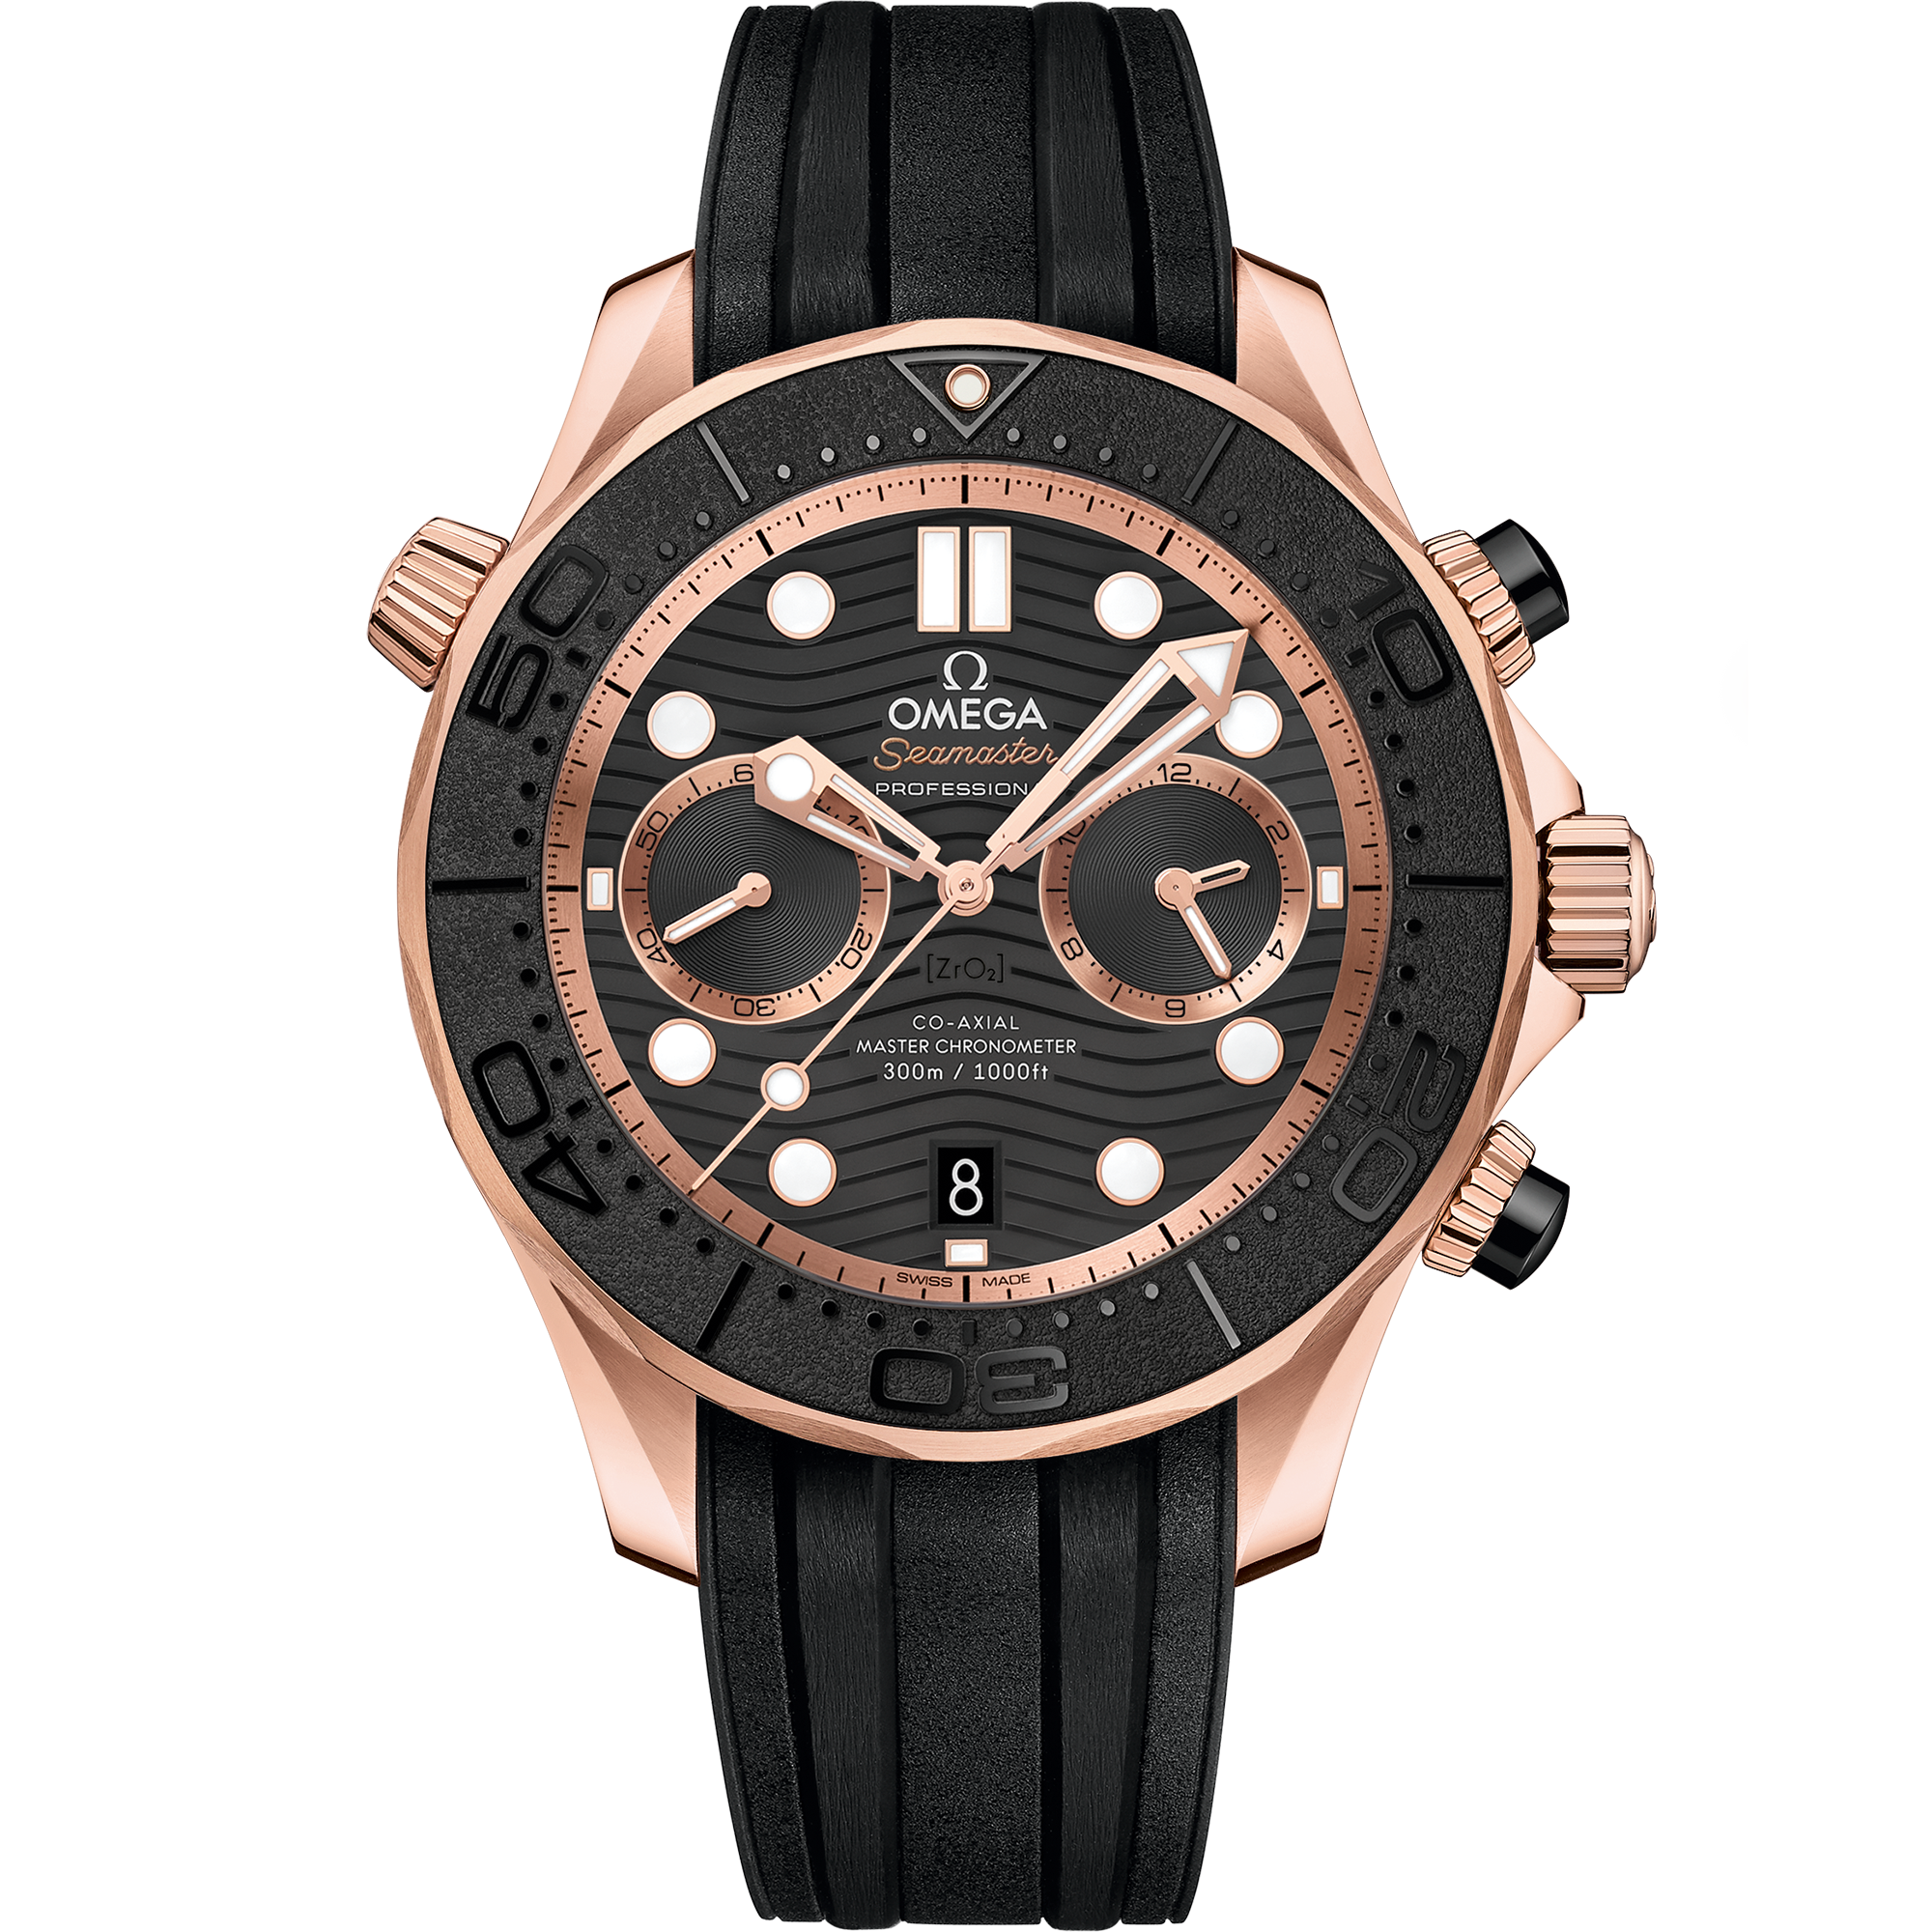 Seamaster 44 mm, Sedna™ gold on rubber strap - 210.62.44.51.01.001